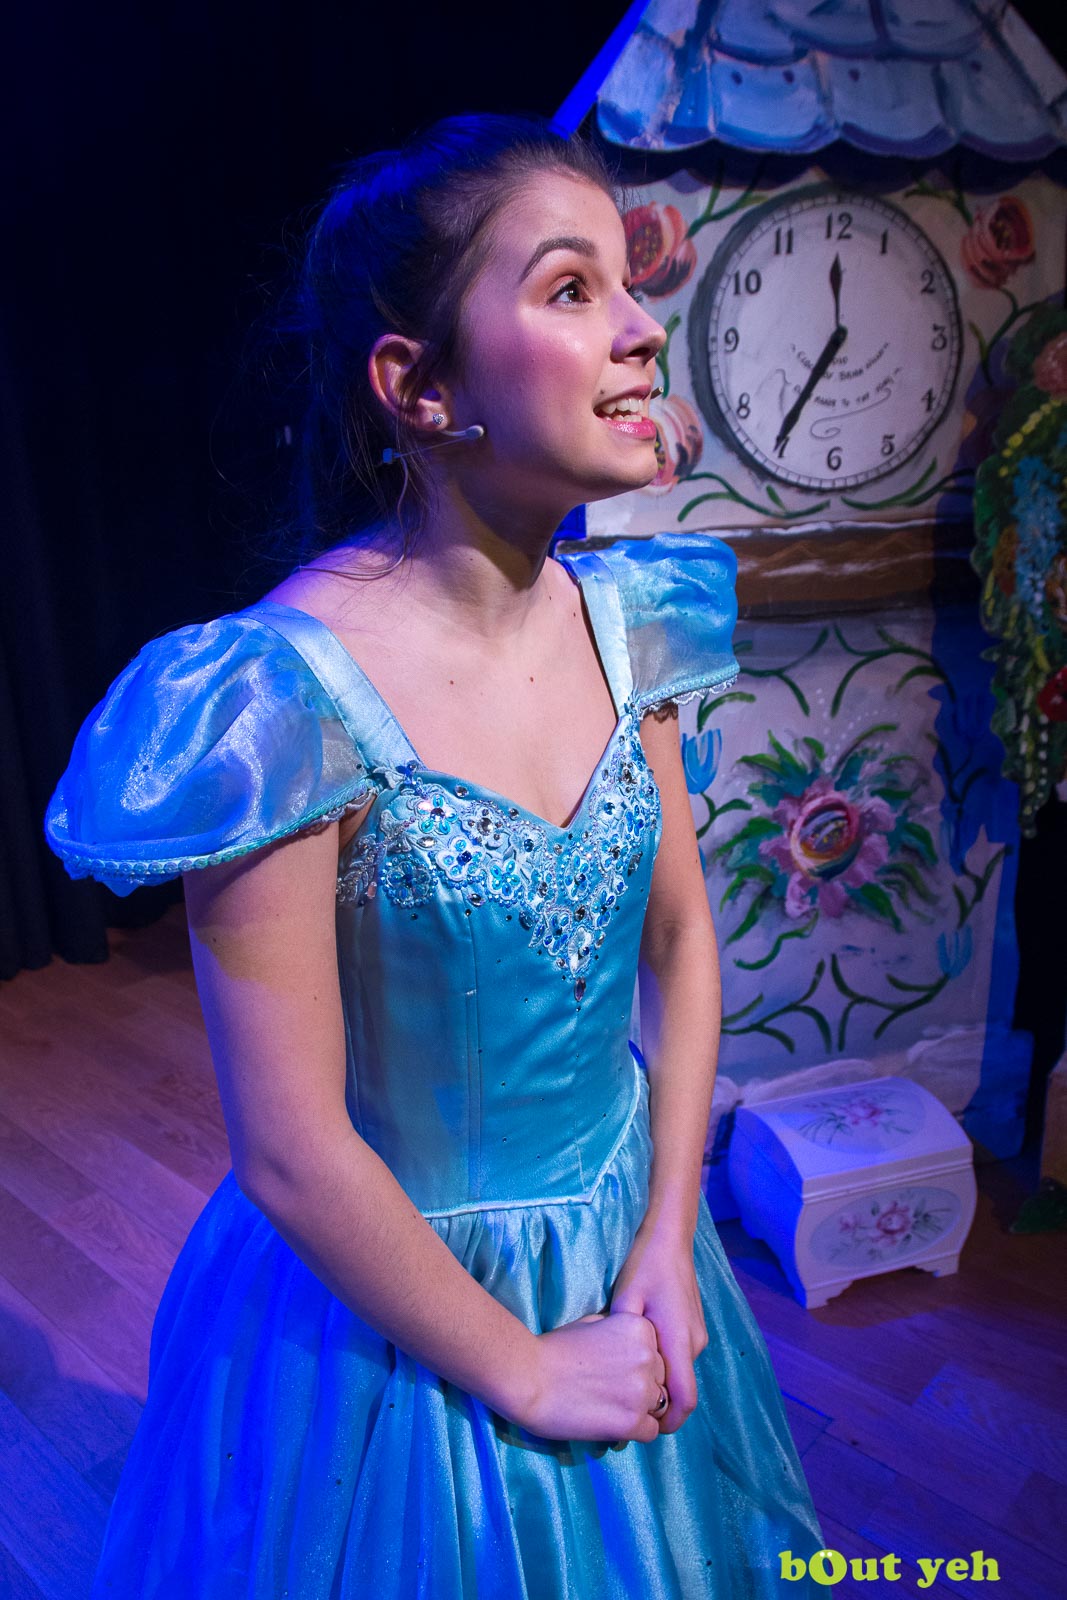 PR photographers Belfast portfolio photo 9944 of Cinderella pantomime at the Old Courthouse Theatre Antrim - Bout Yeh photography and video production services Belfast, Northern Ireland